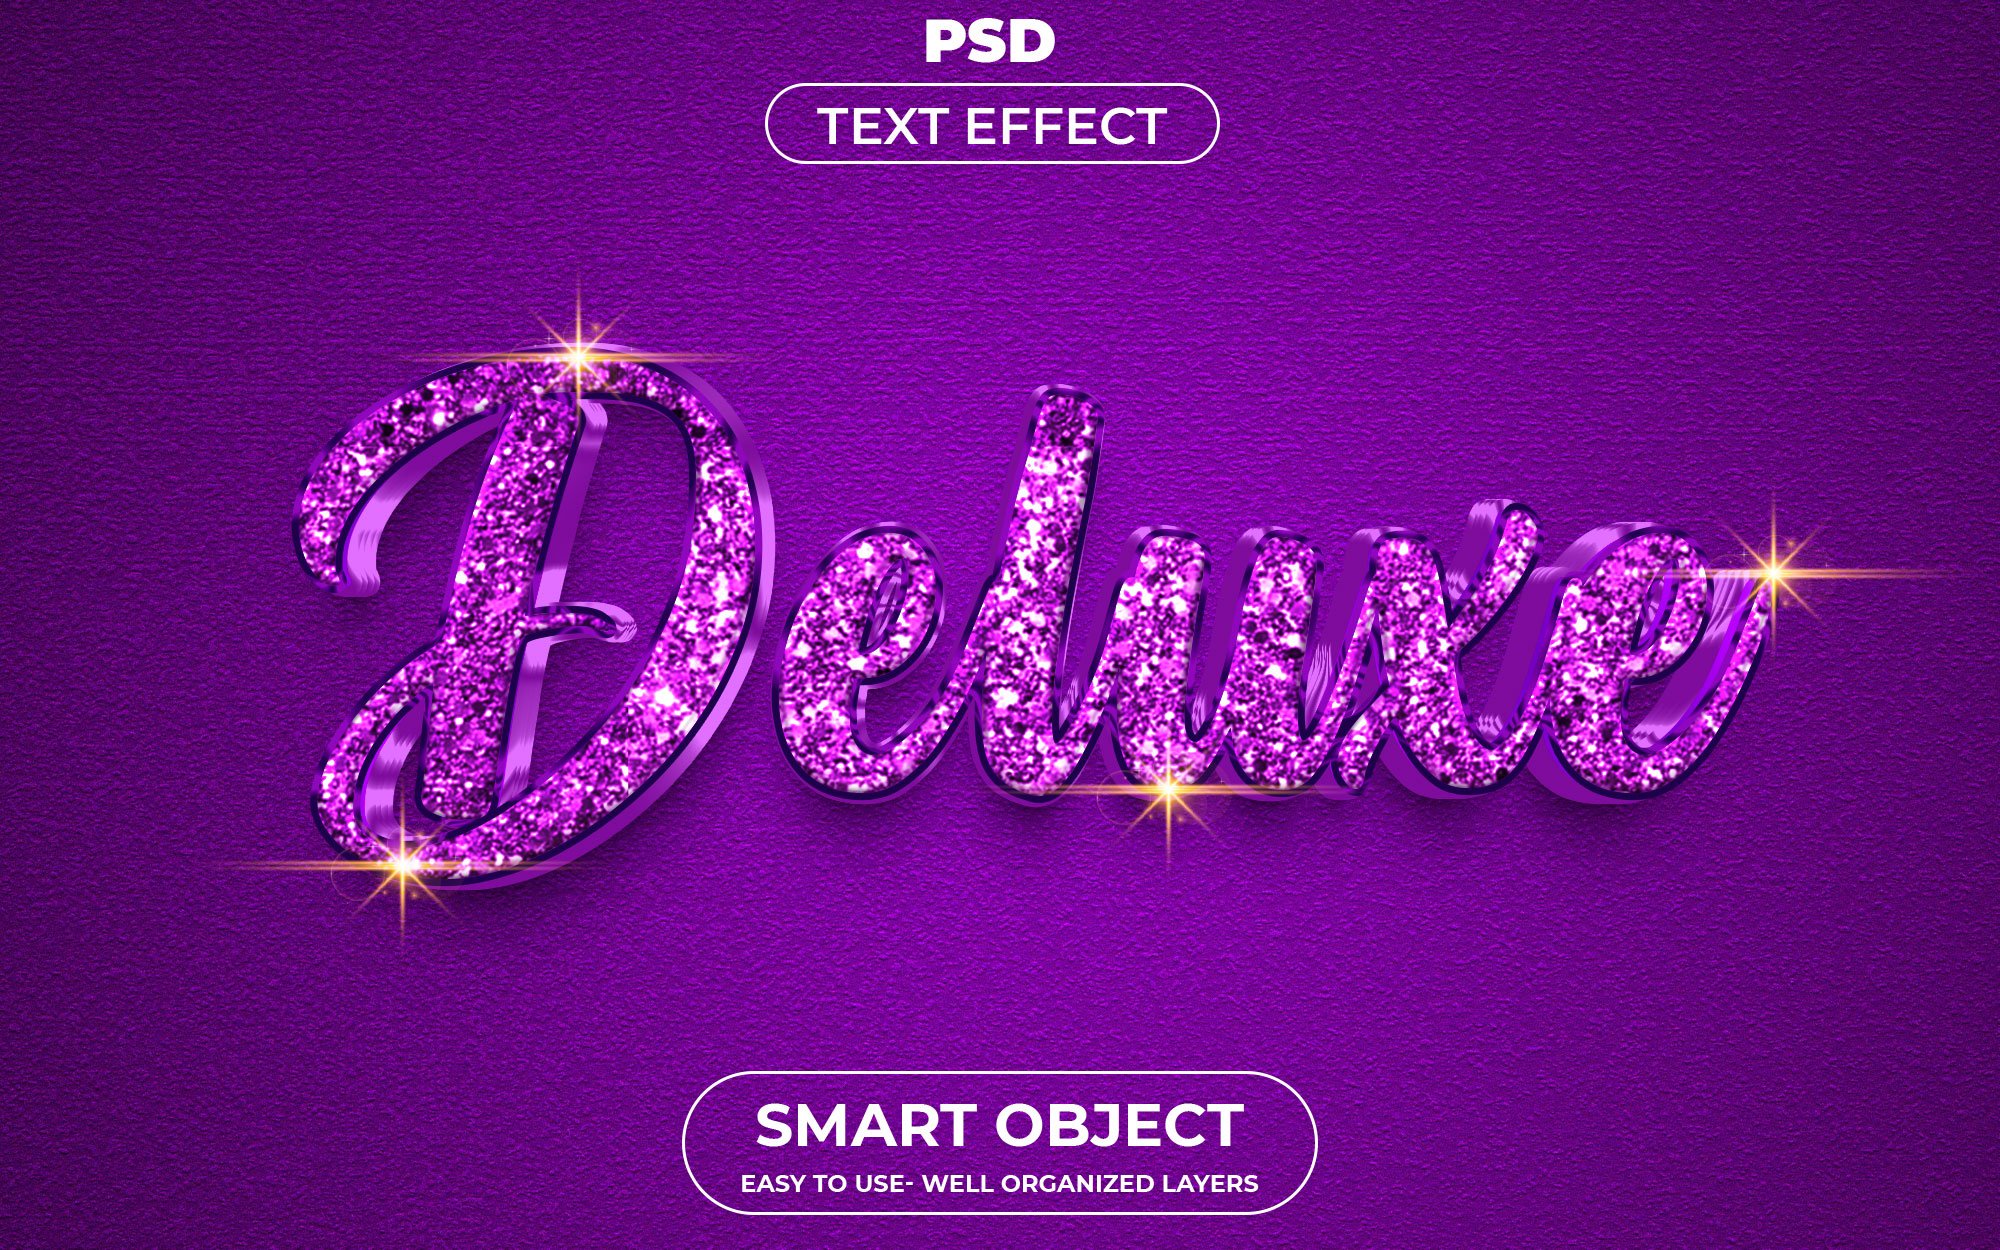 Deluxe 3D Editable psd Text Effectcover image.